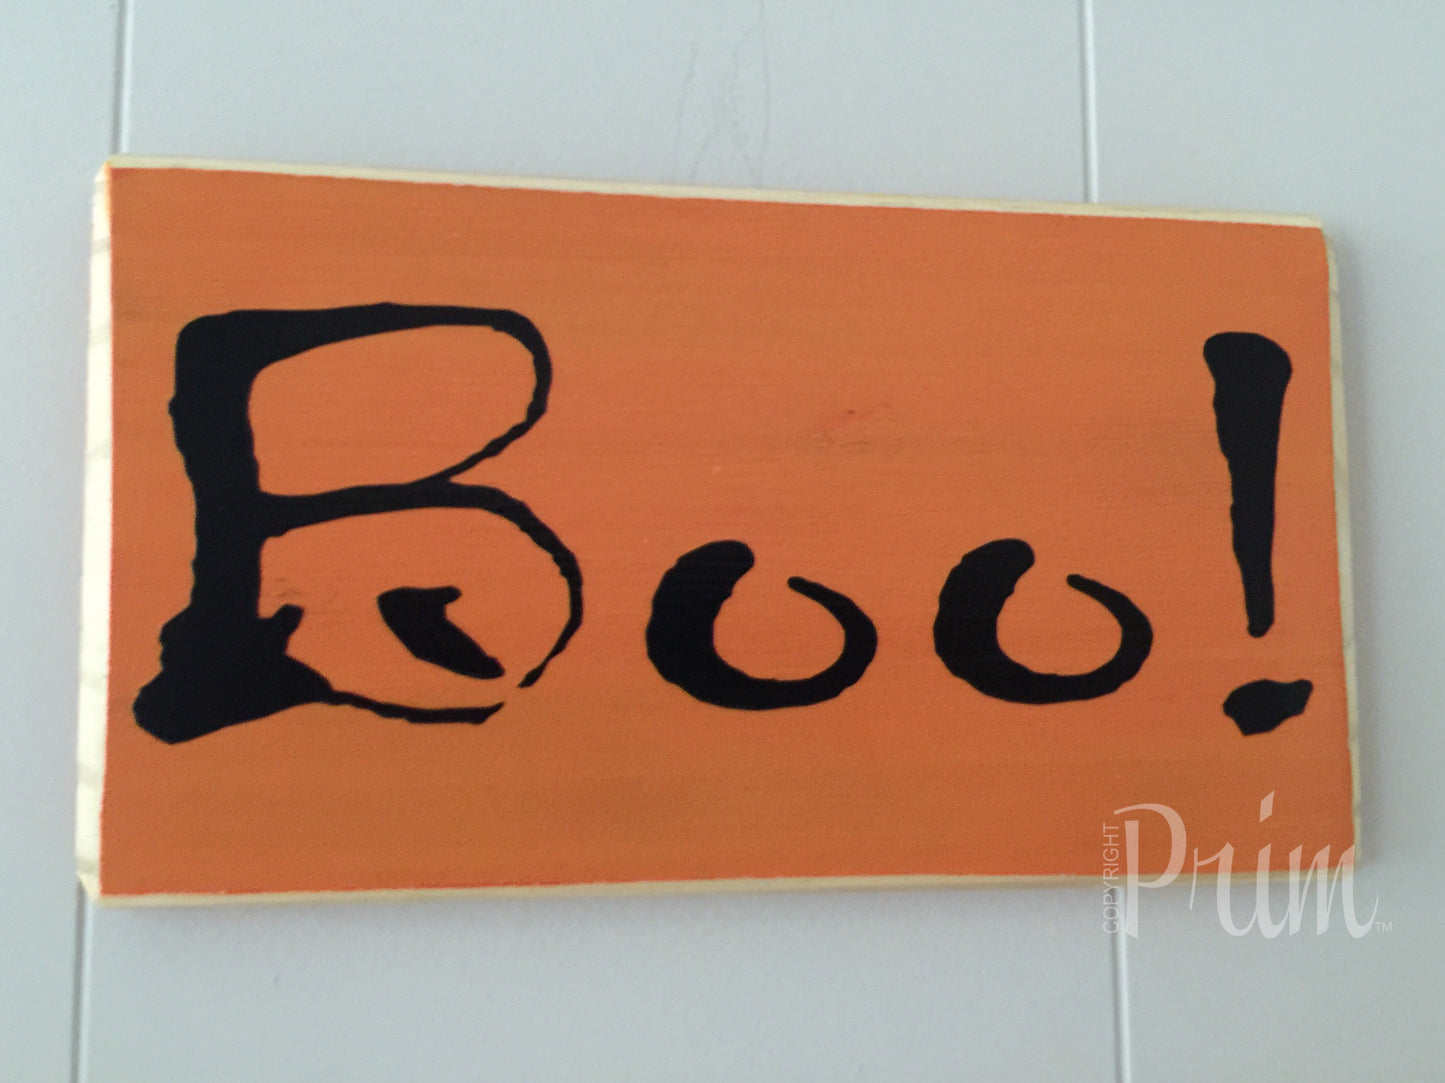 10x6 Boo! Wood Halloween Scary Trick or Treat Sign